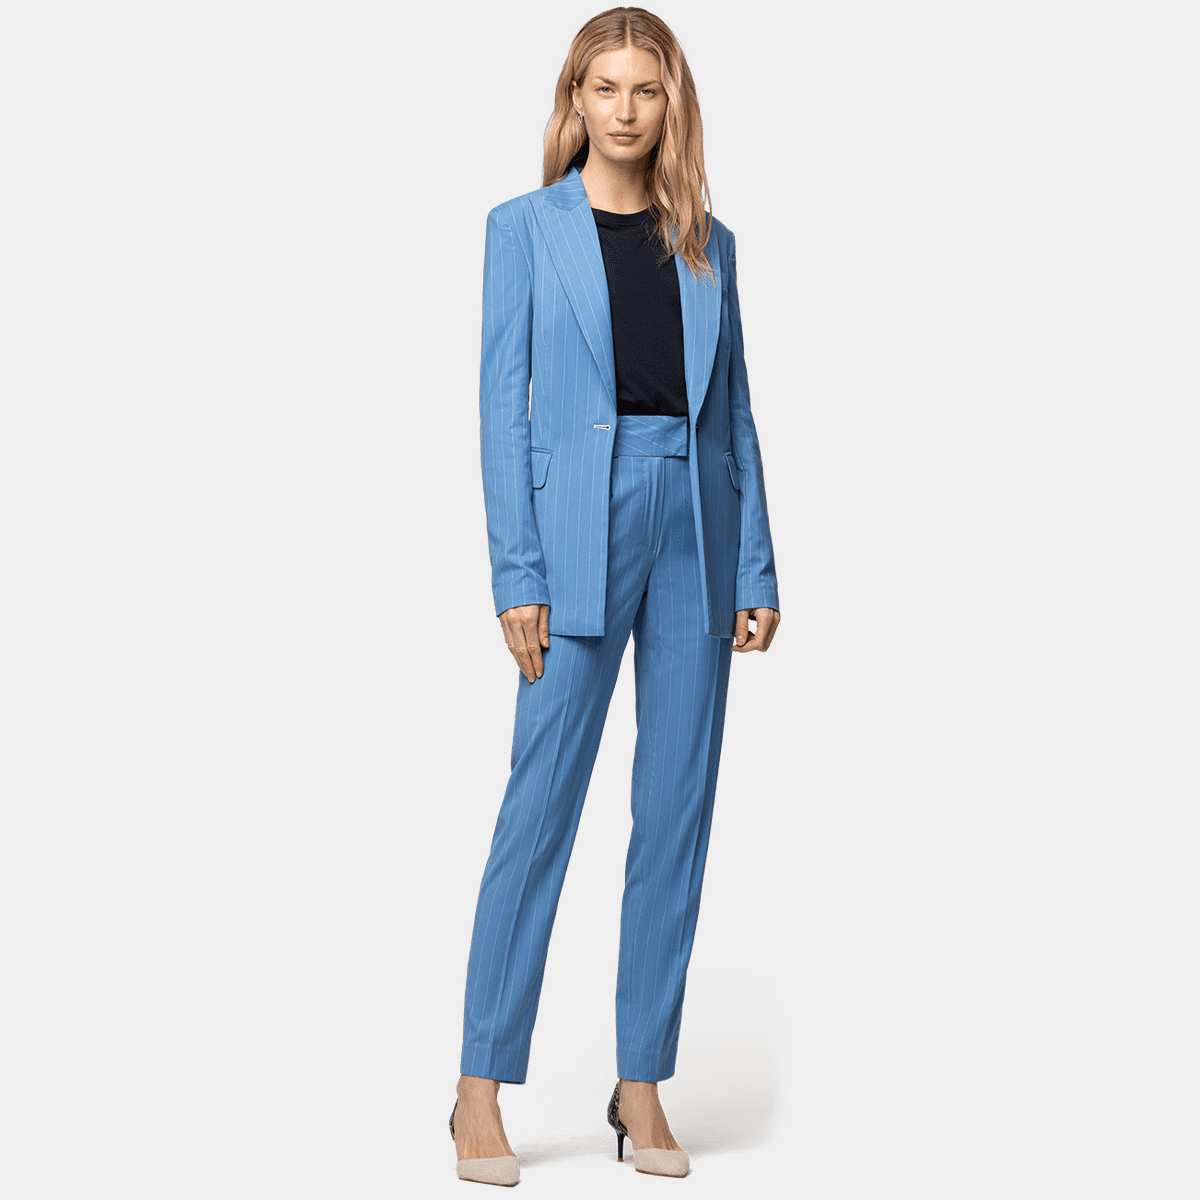 REORIAFEE Western Outfit for Women Gym Outfits Women's Long Sleeve Suit  Pants Casual Elegant Business Suit Sky Blue M - Walmart.com